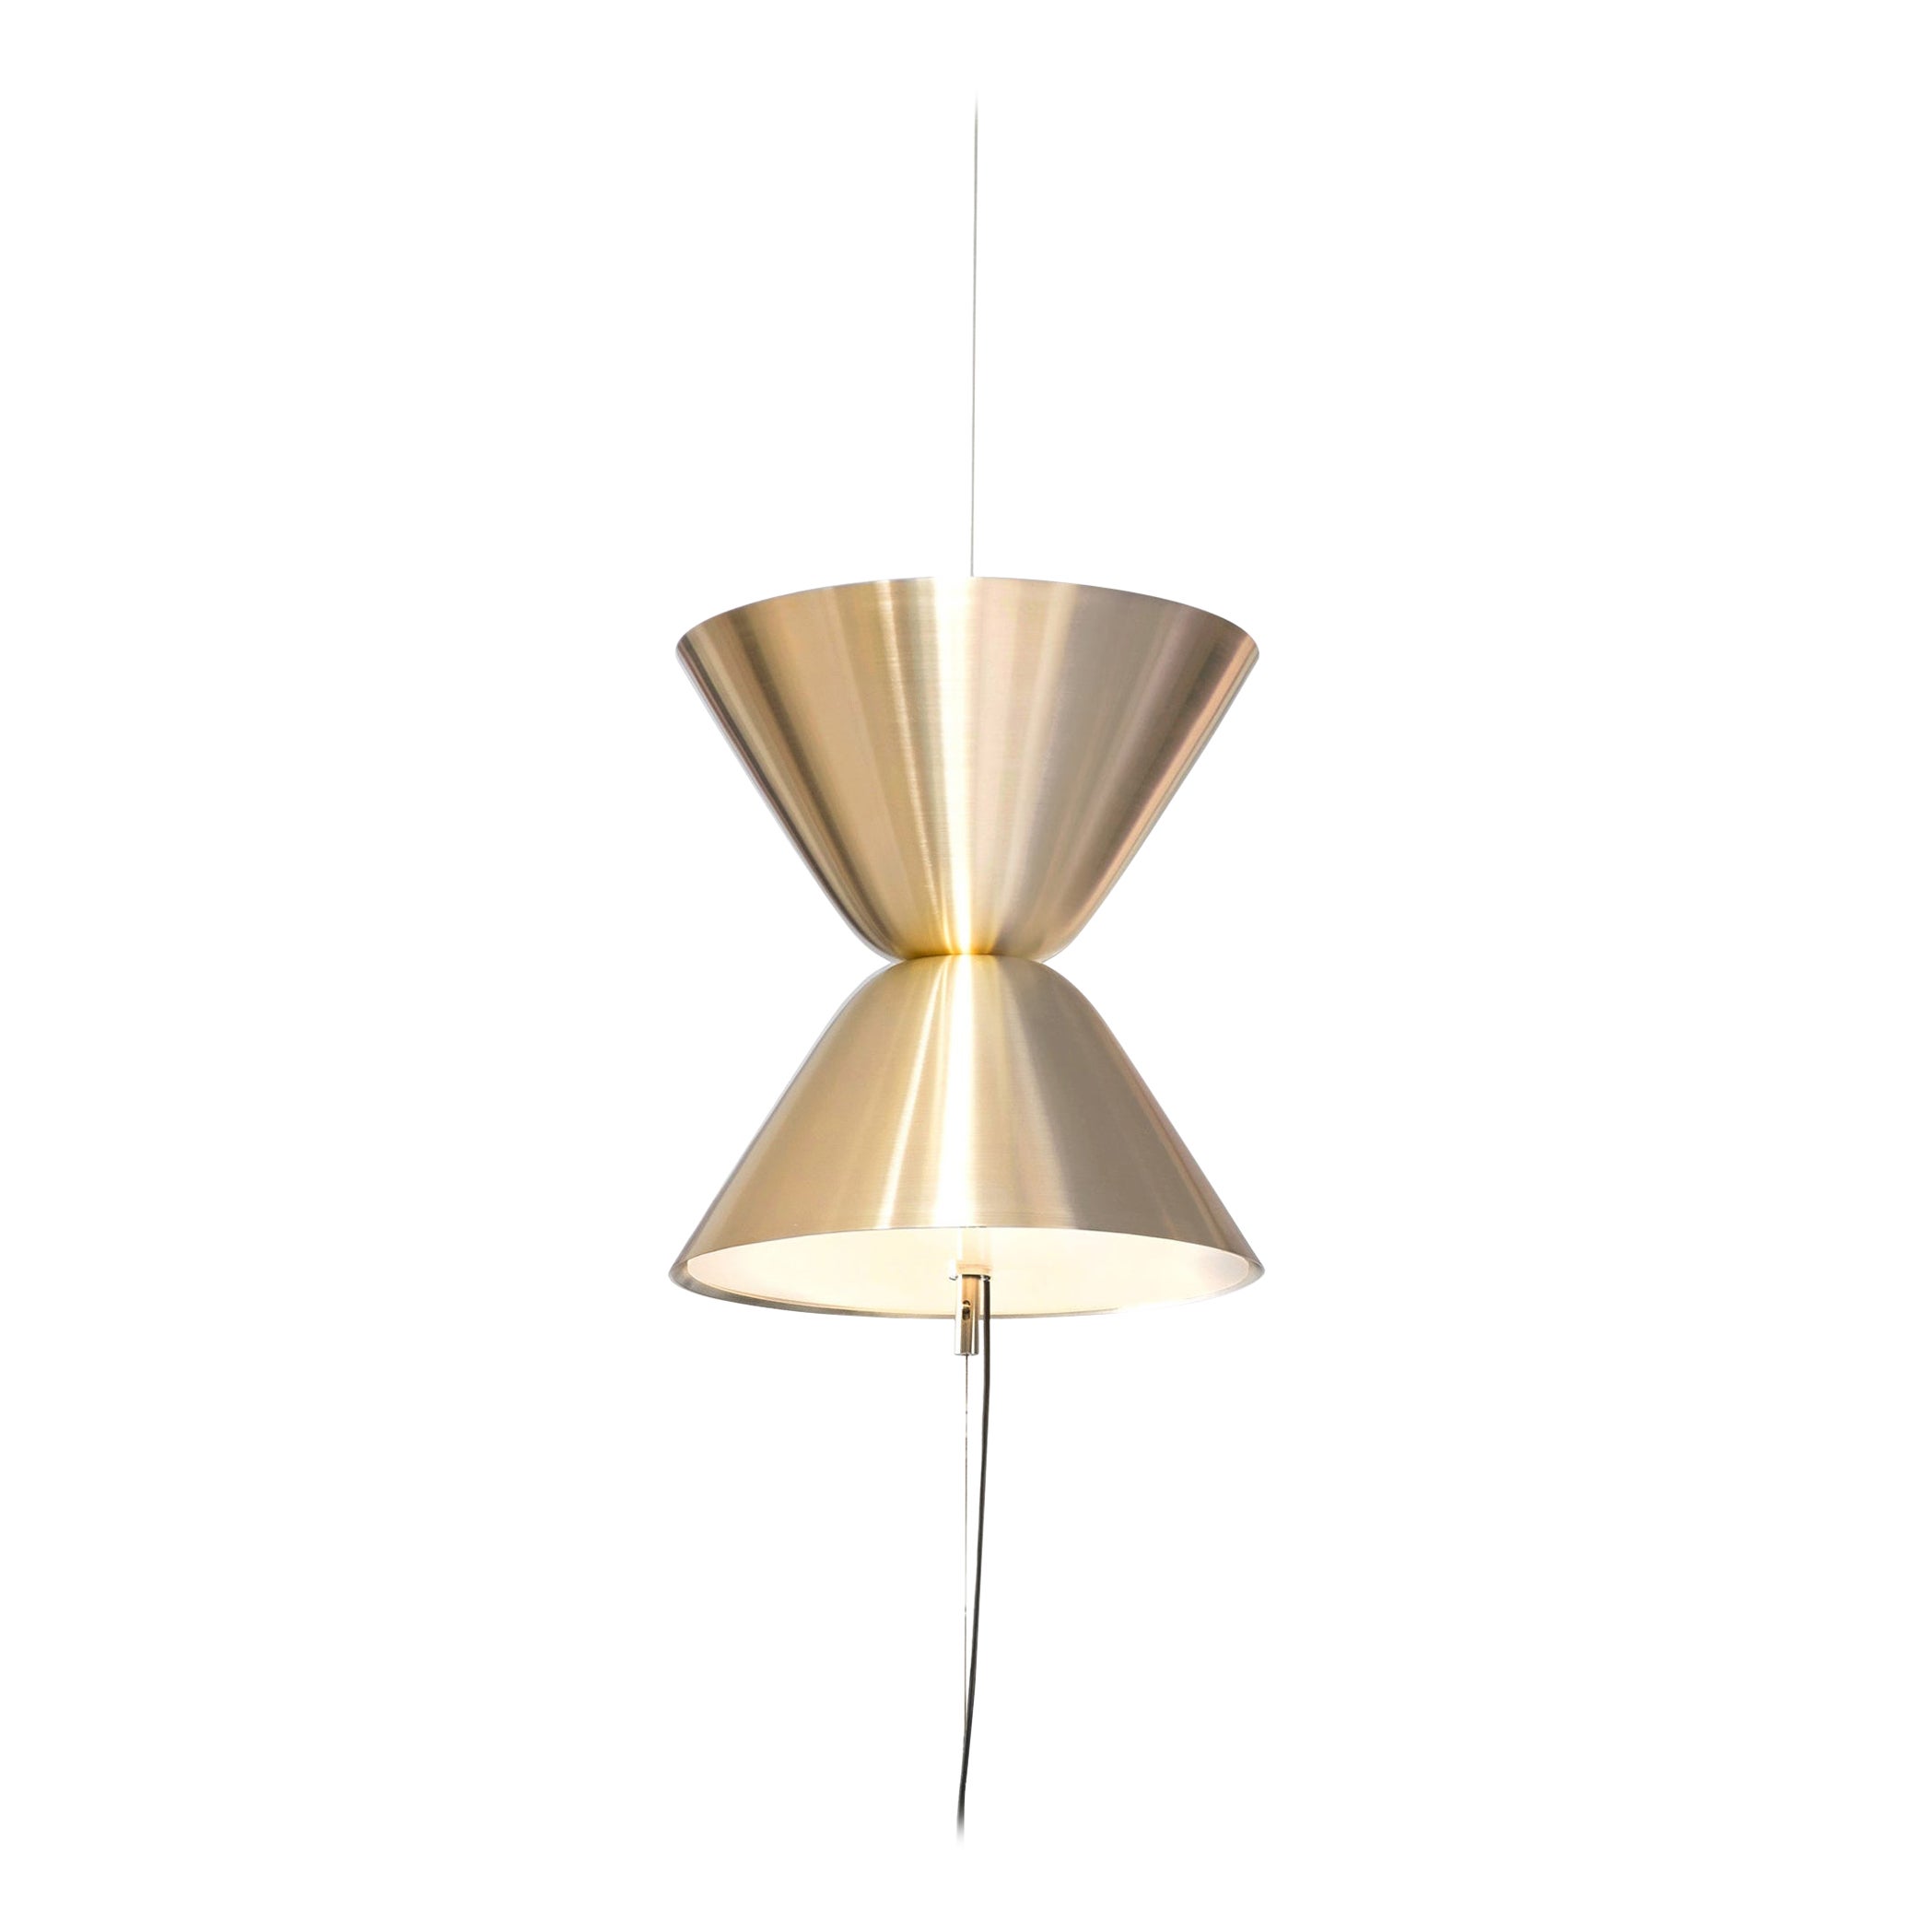 Daniel Becker 'Aureole' Suspended Floor Lamp in Brushed Brass for Moss Objects